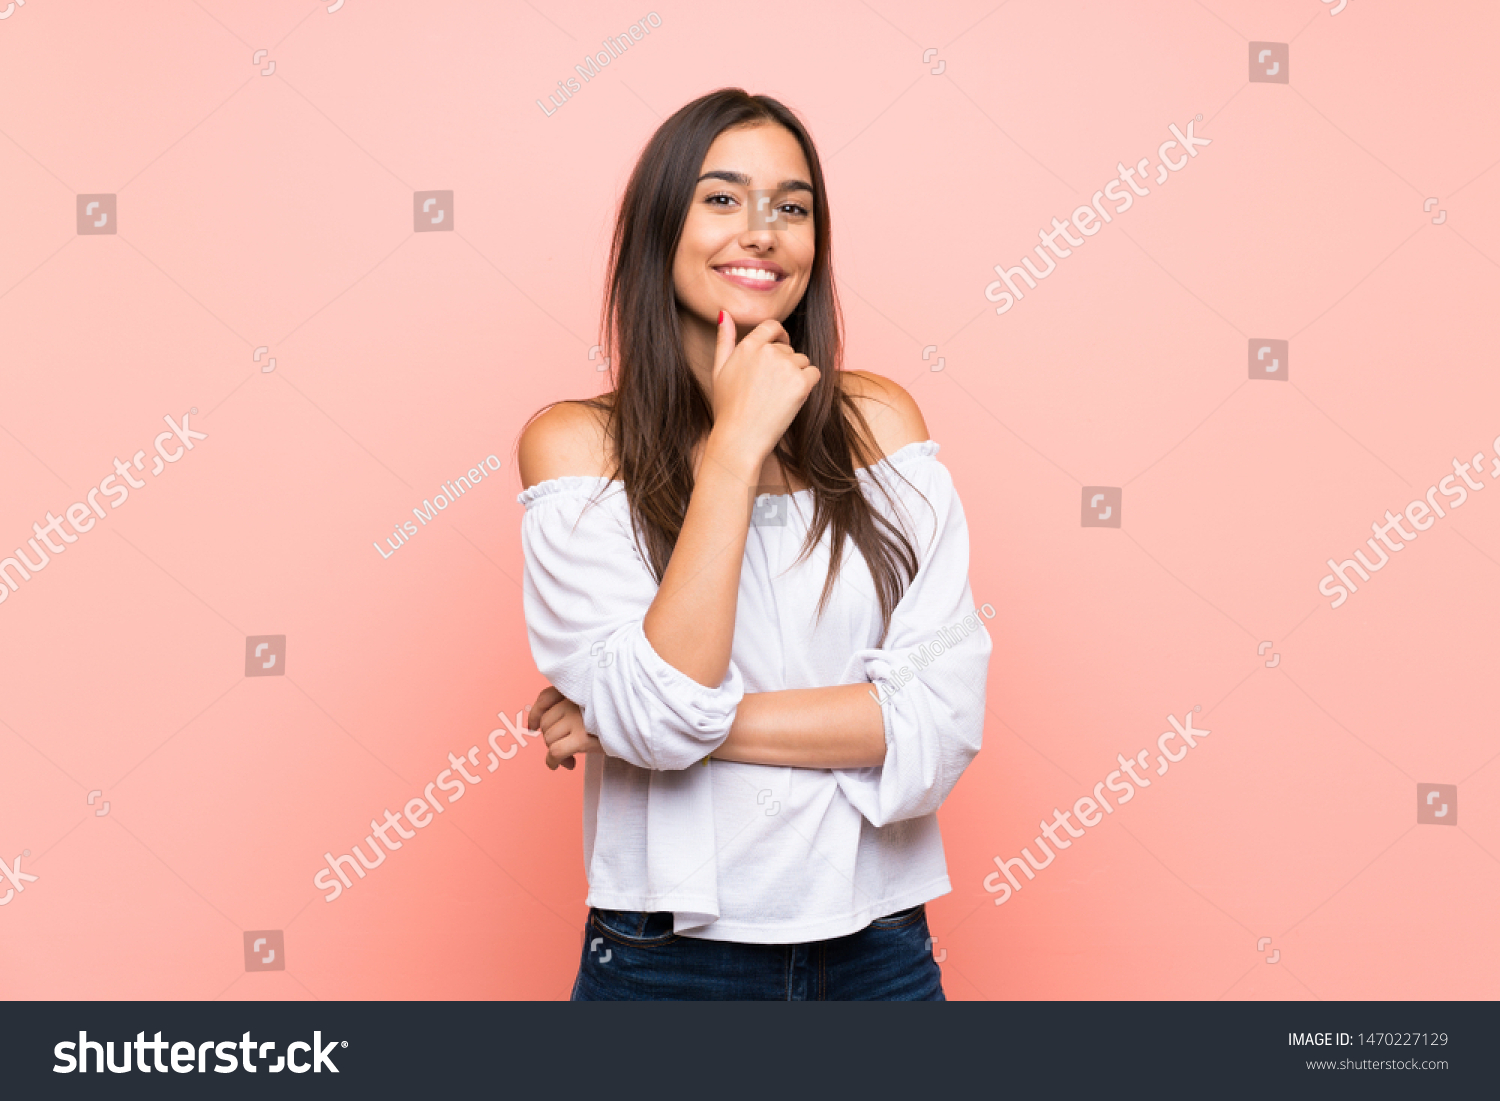 Young woman over isolated pink background smiling #1470227129